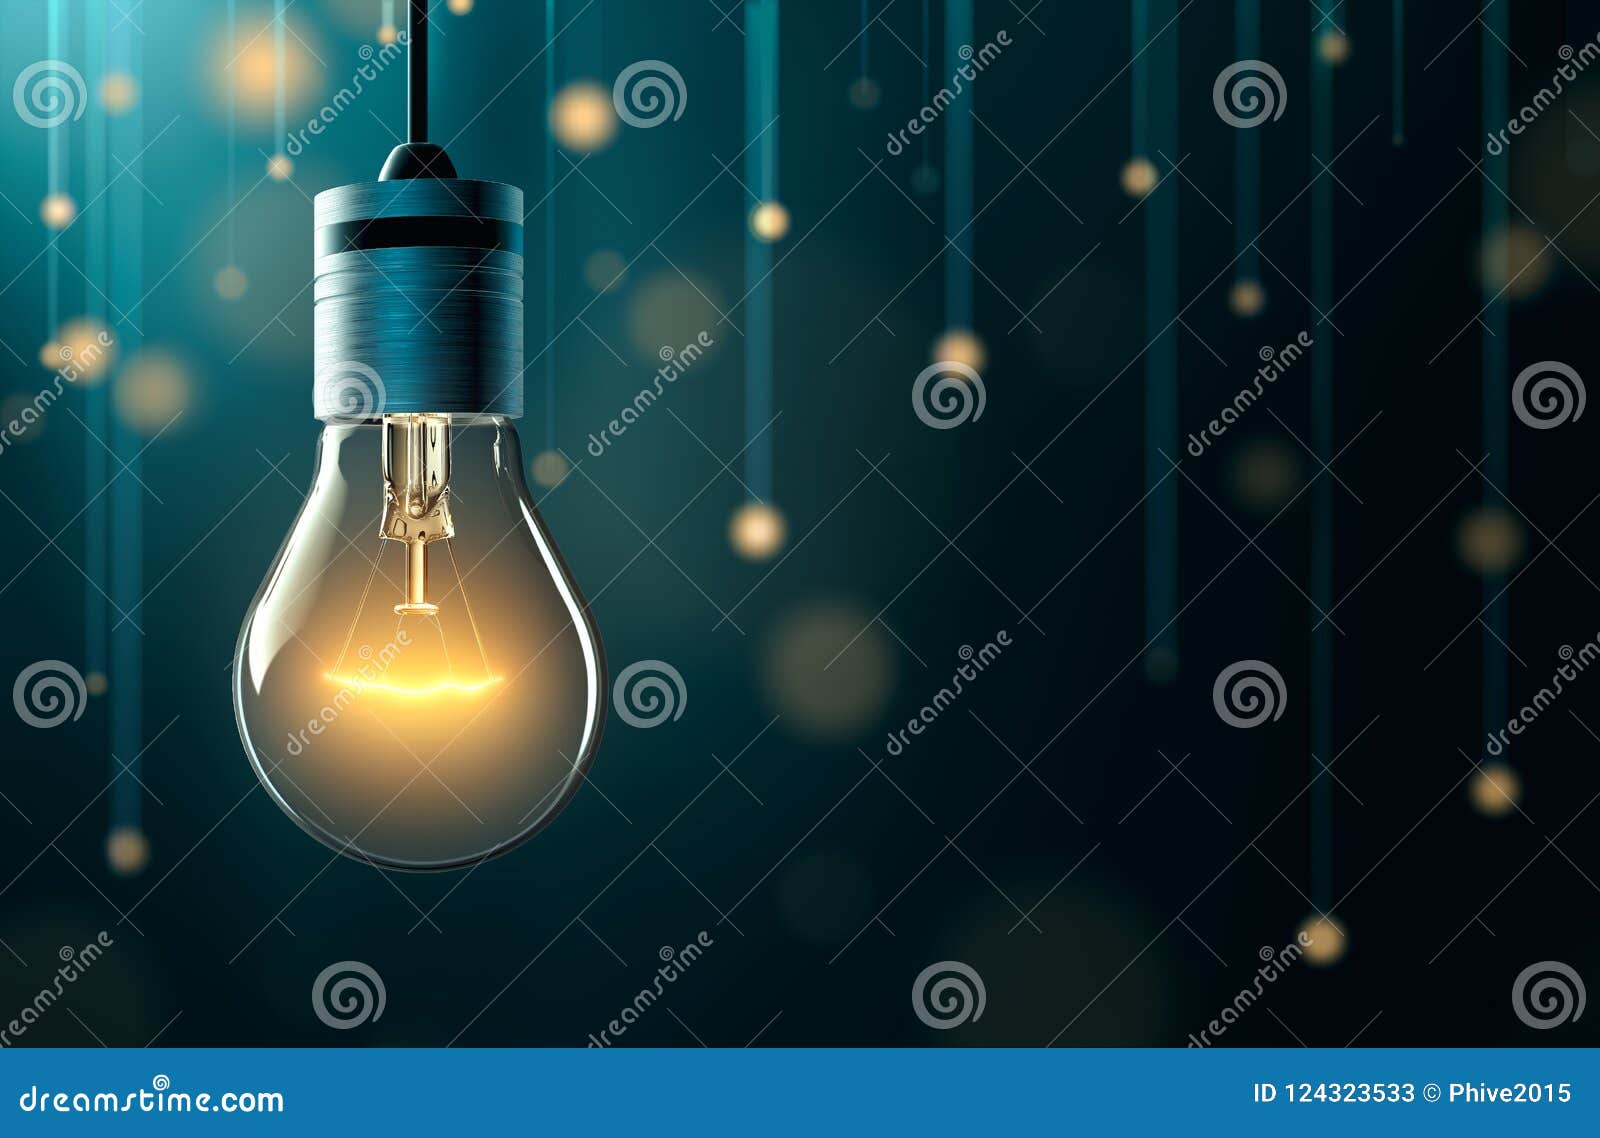 light bulb with hanging lights background